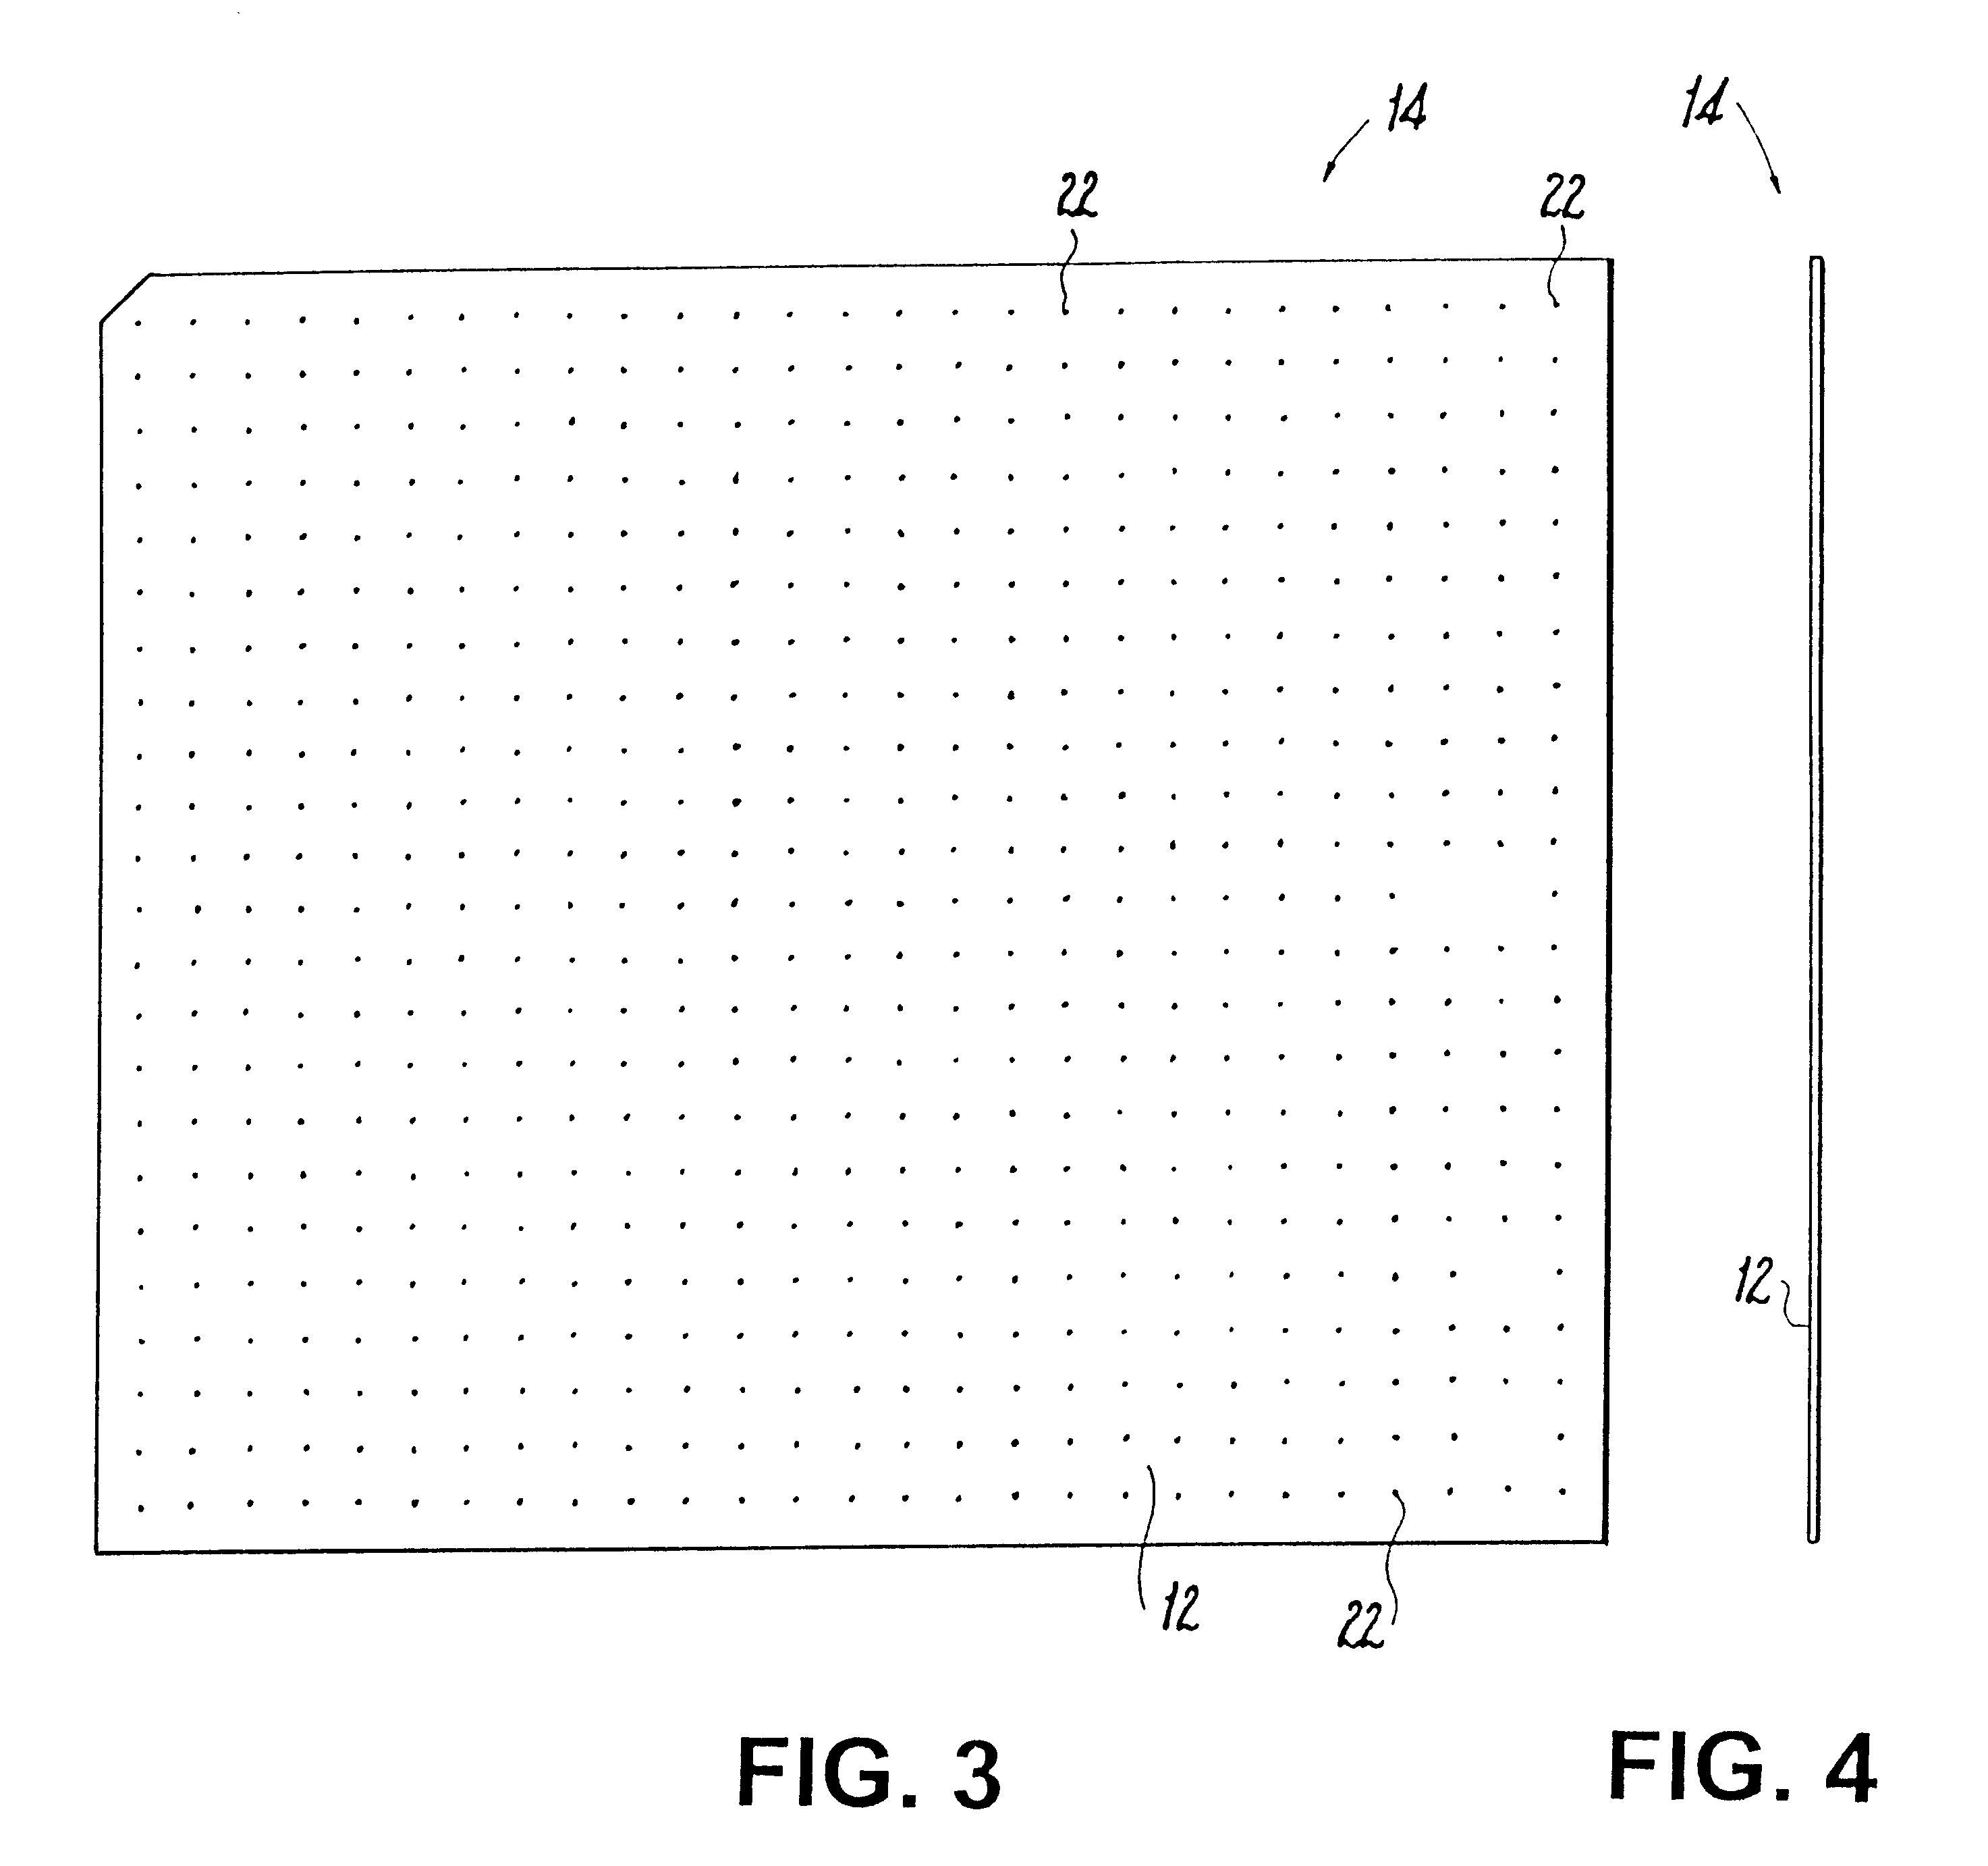 Apparatus and method for holding a flexible product in a flat and secure position